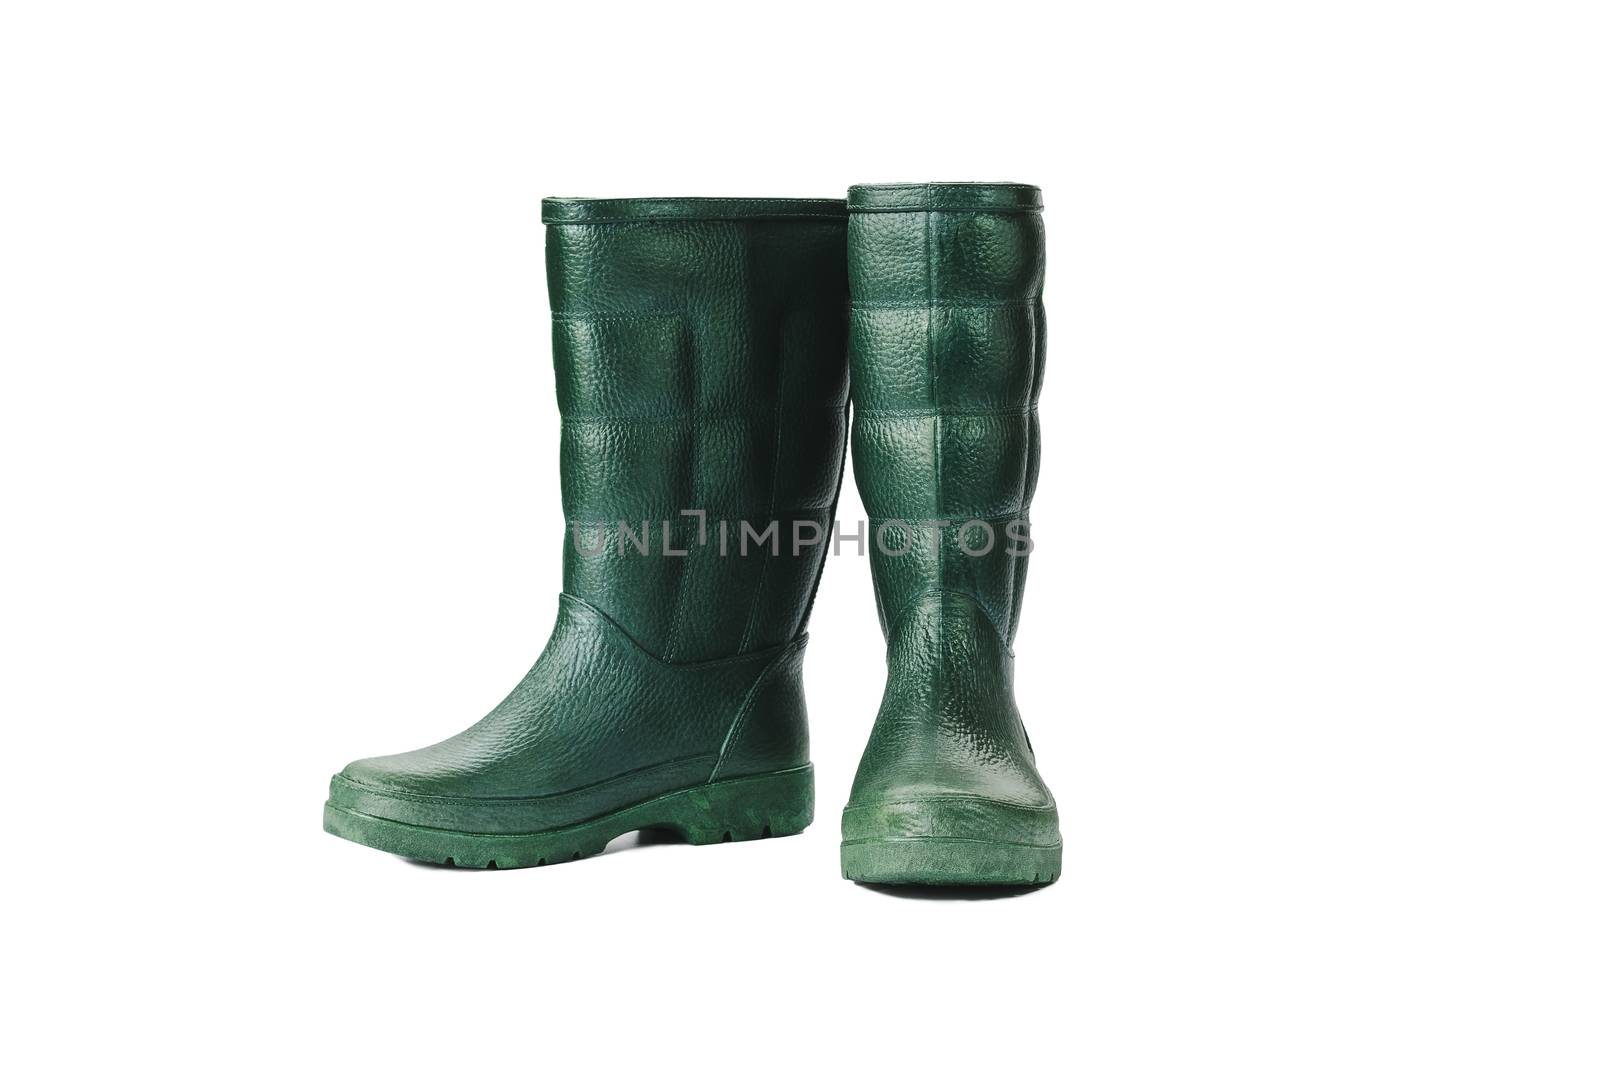 Rubber boots waterproof isolated on white background, with clipping path.